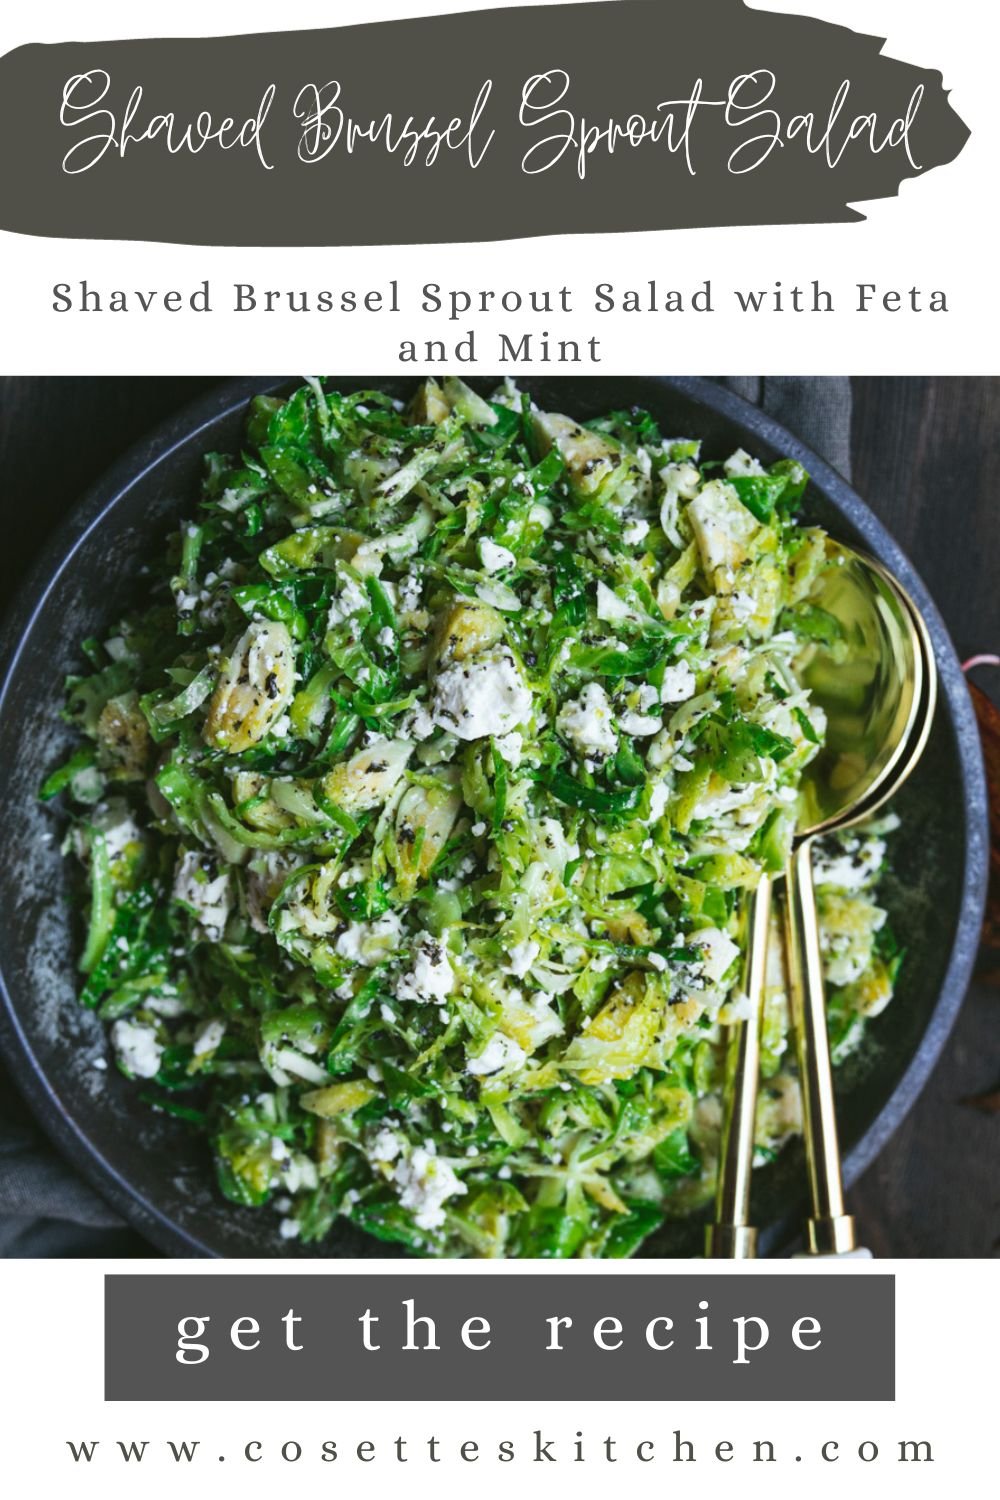 shaved-brussel-sprout-salad-with-feta-and-mint